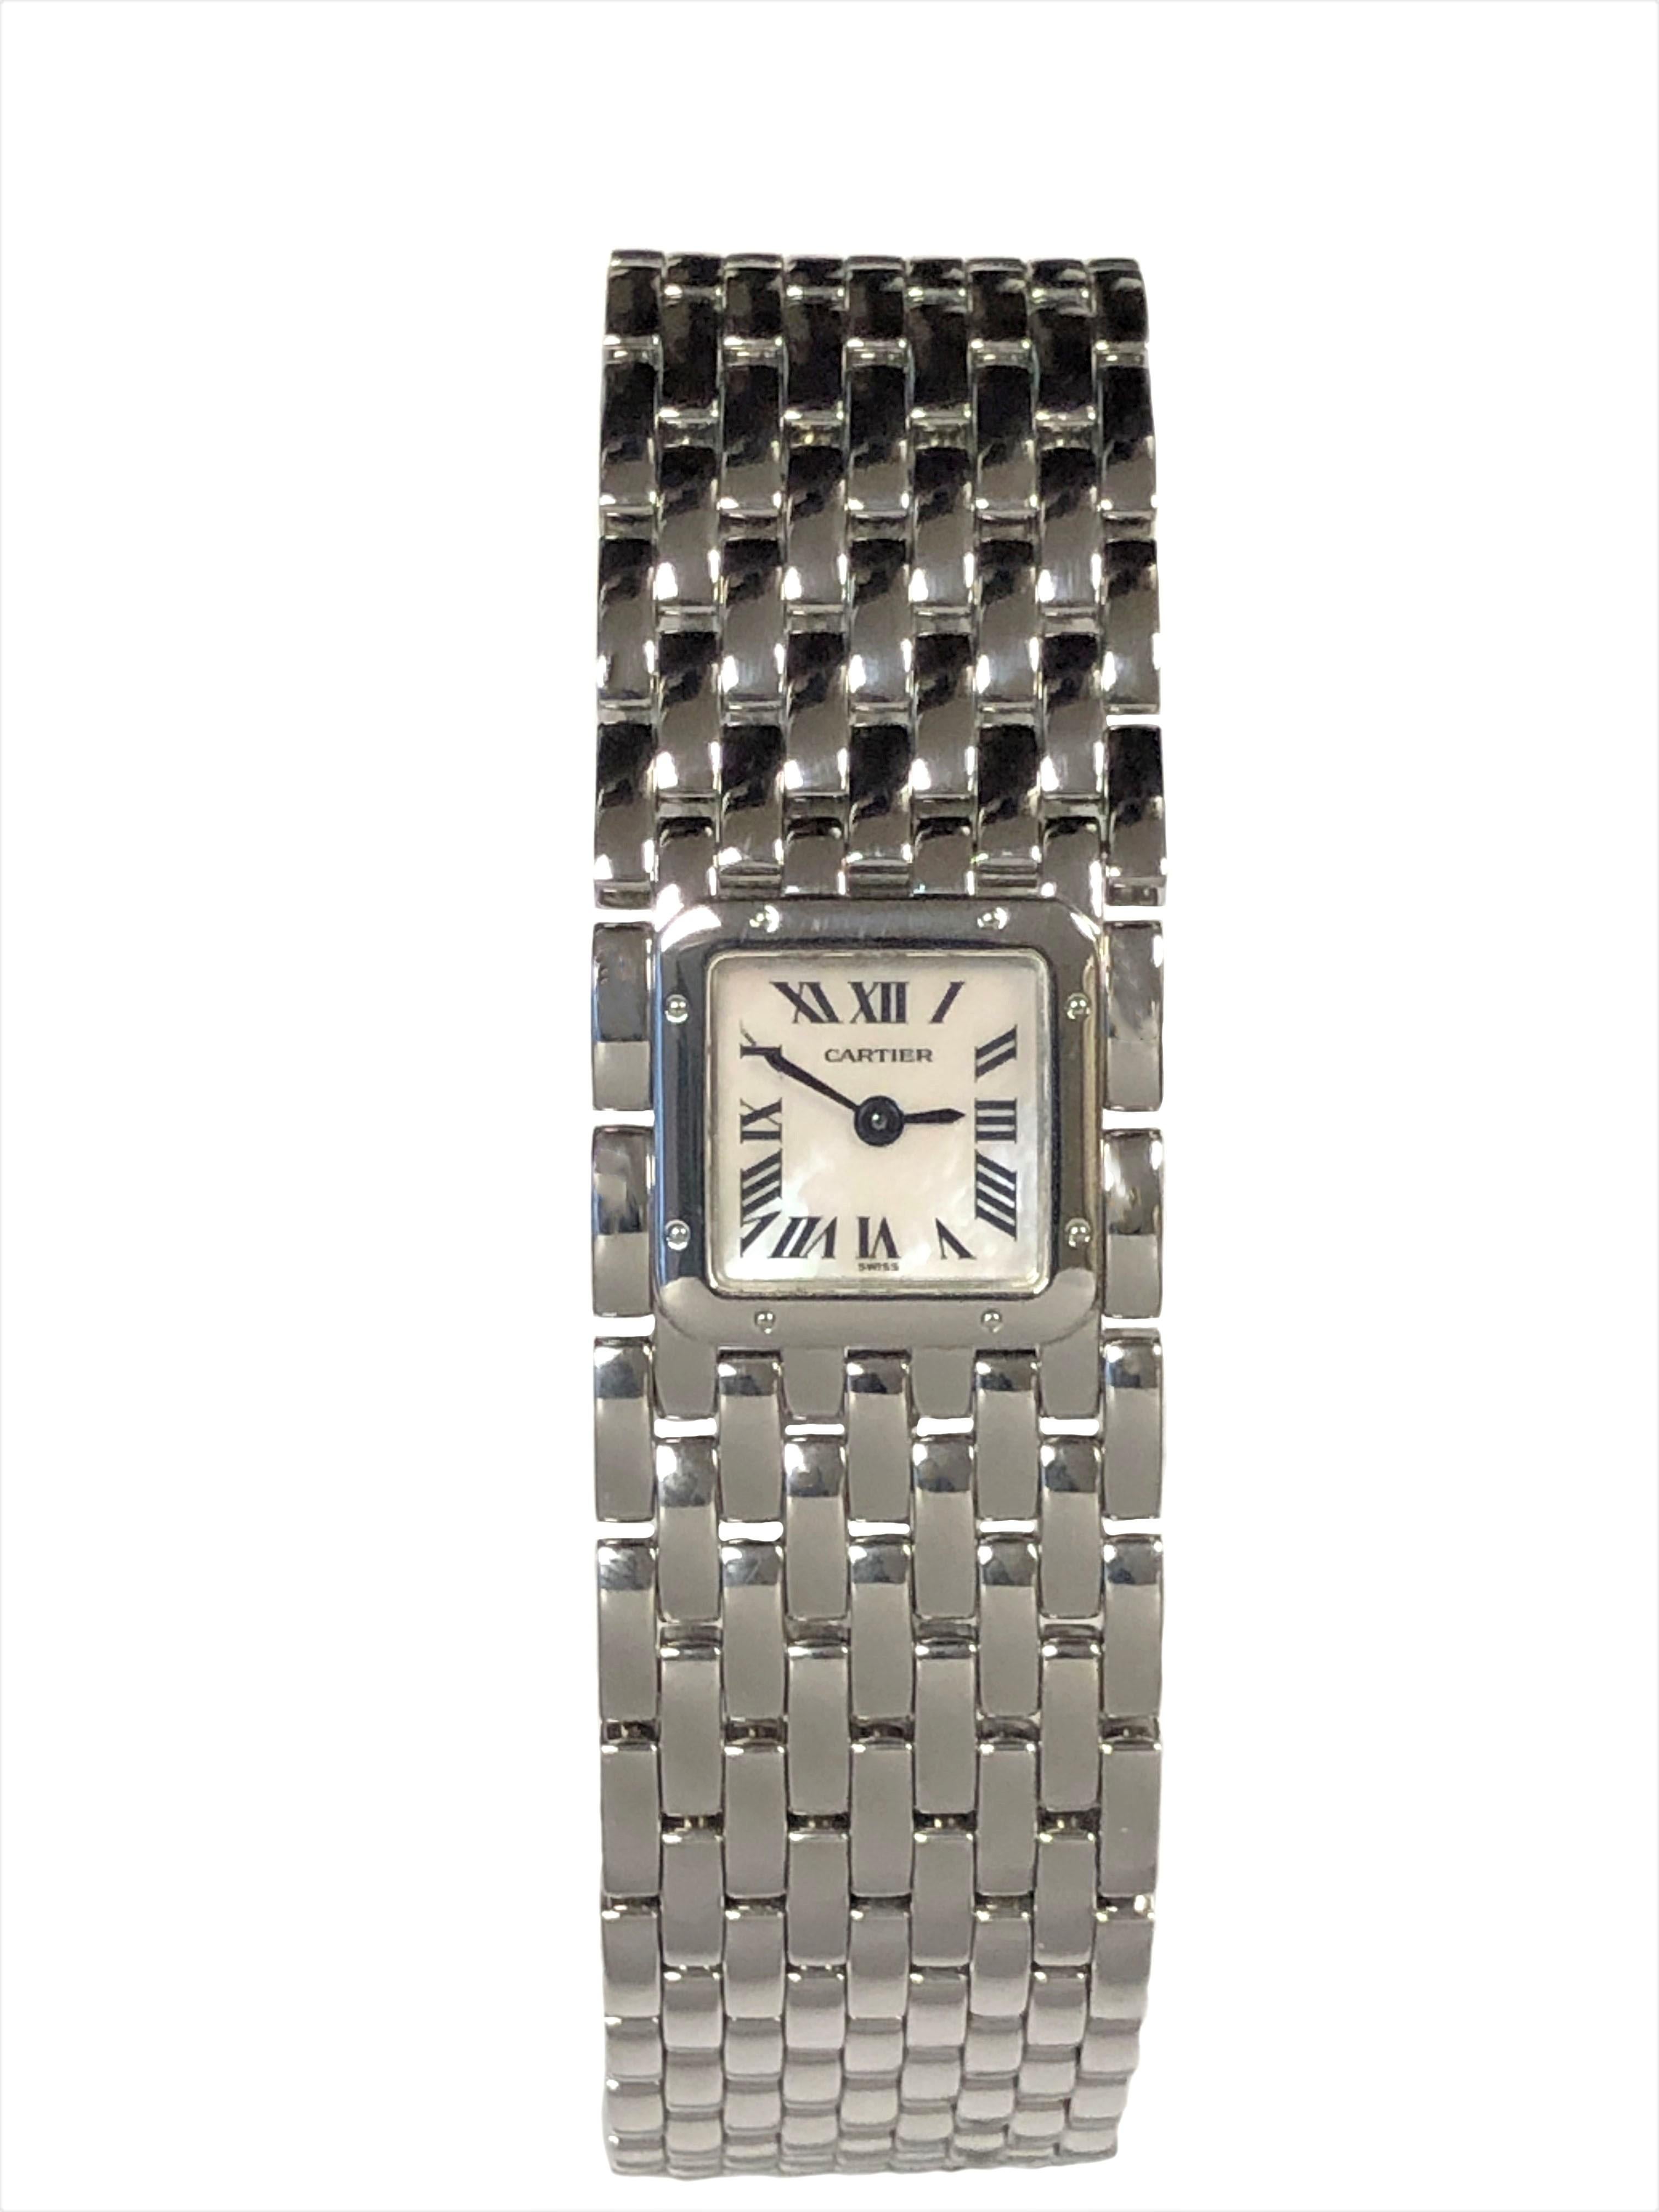 Circa 2005 Cartier Ruban Ladies bracelet wrist watch, Quartz movement, White Mother-of-Pearl dial. 7/8 inch wide bracelet with hidden deployment buckle. Wrist size 6 1/2 inches and has links that can be removed for sizing smaller if needed. Comes in